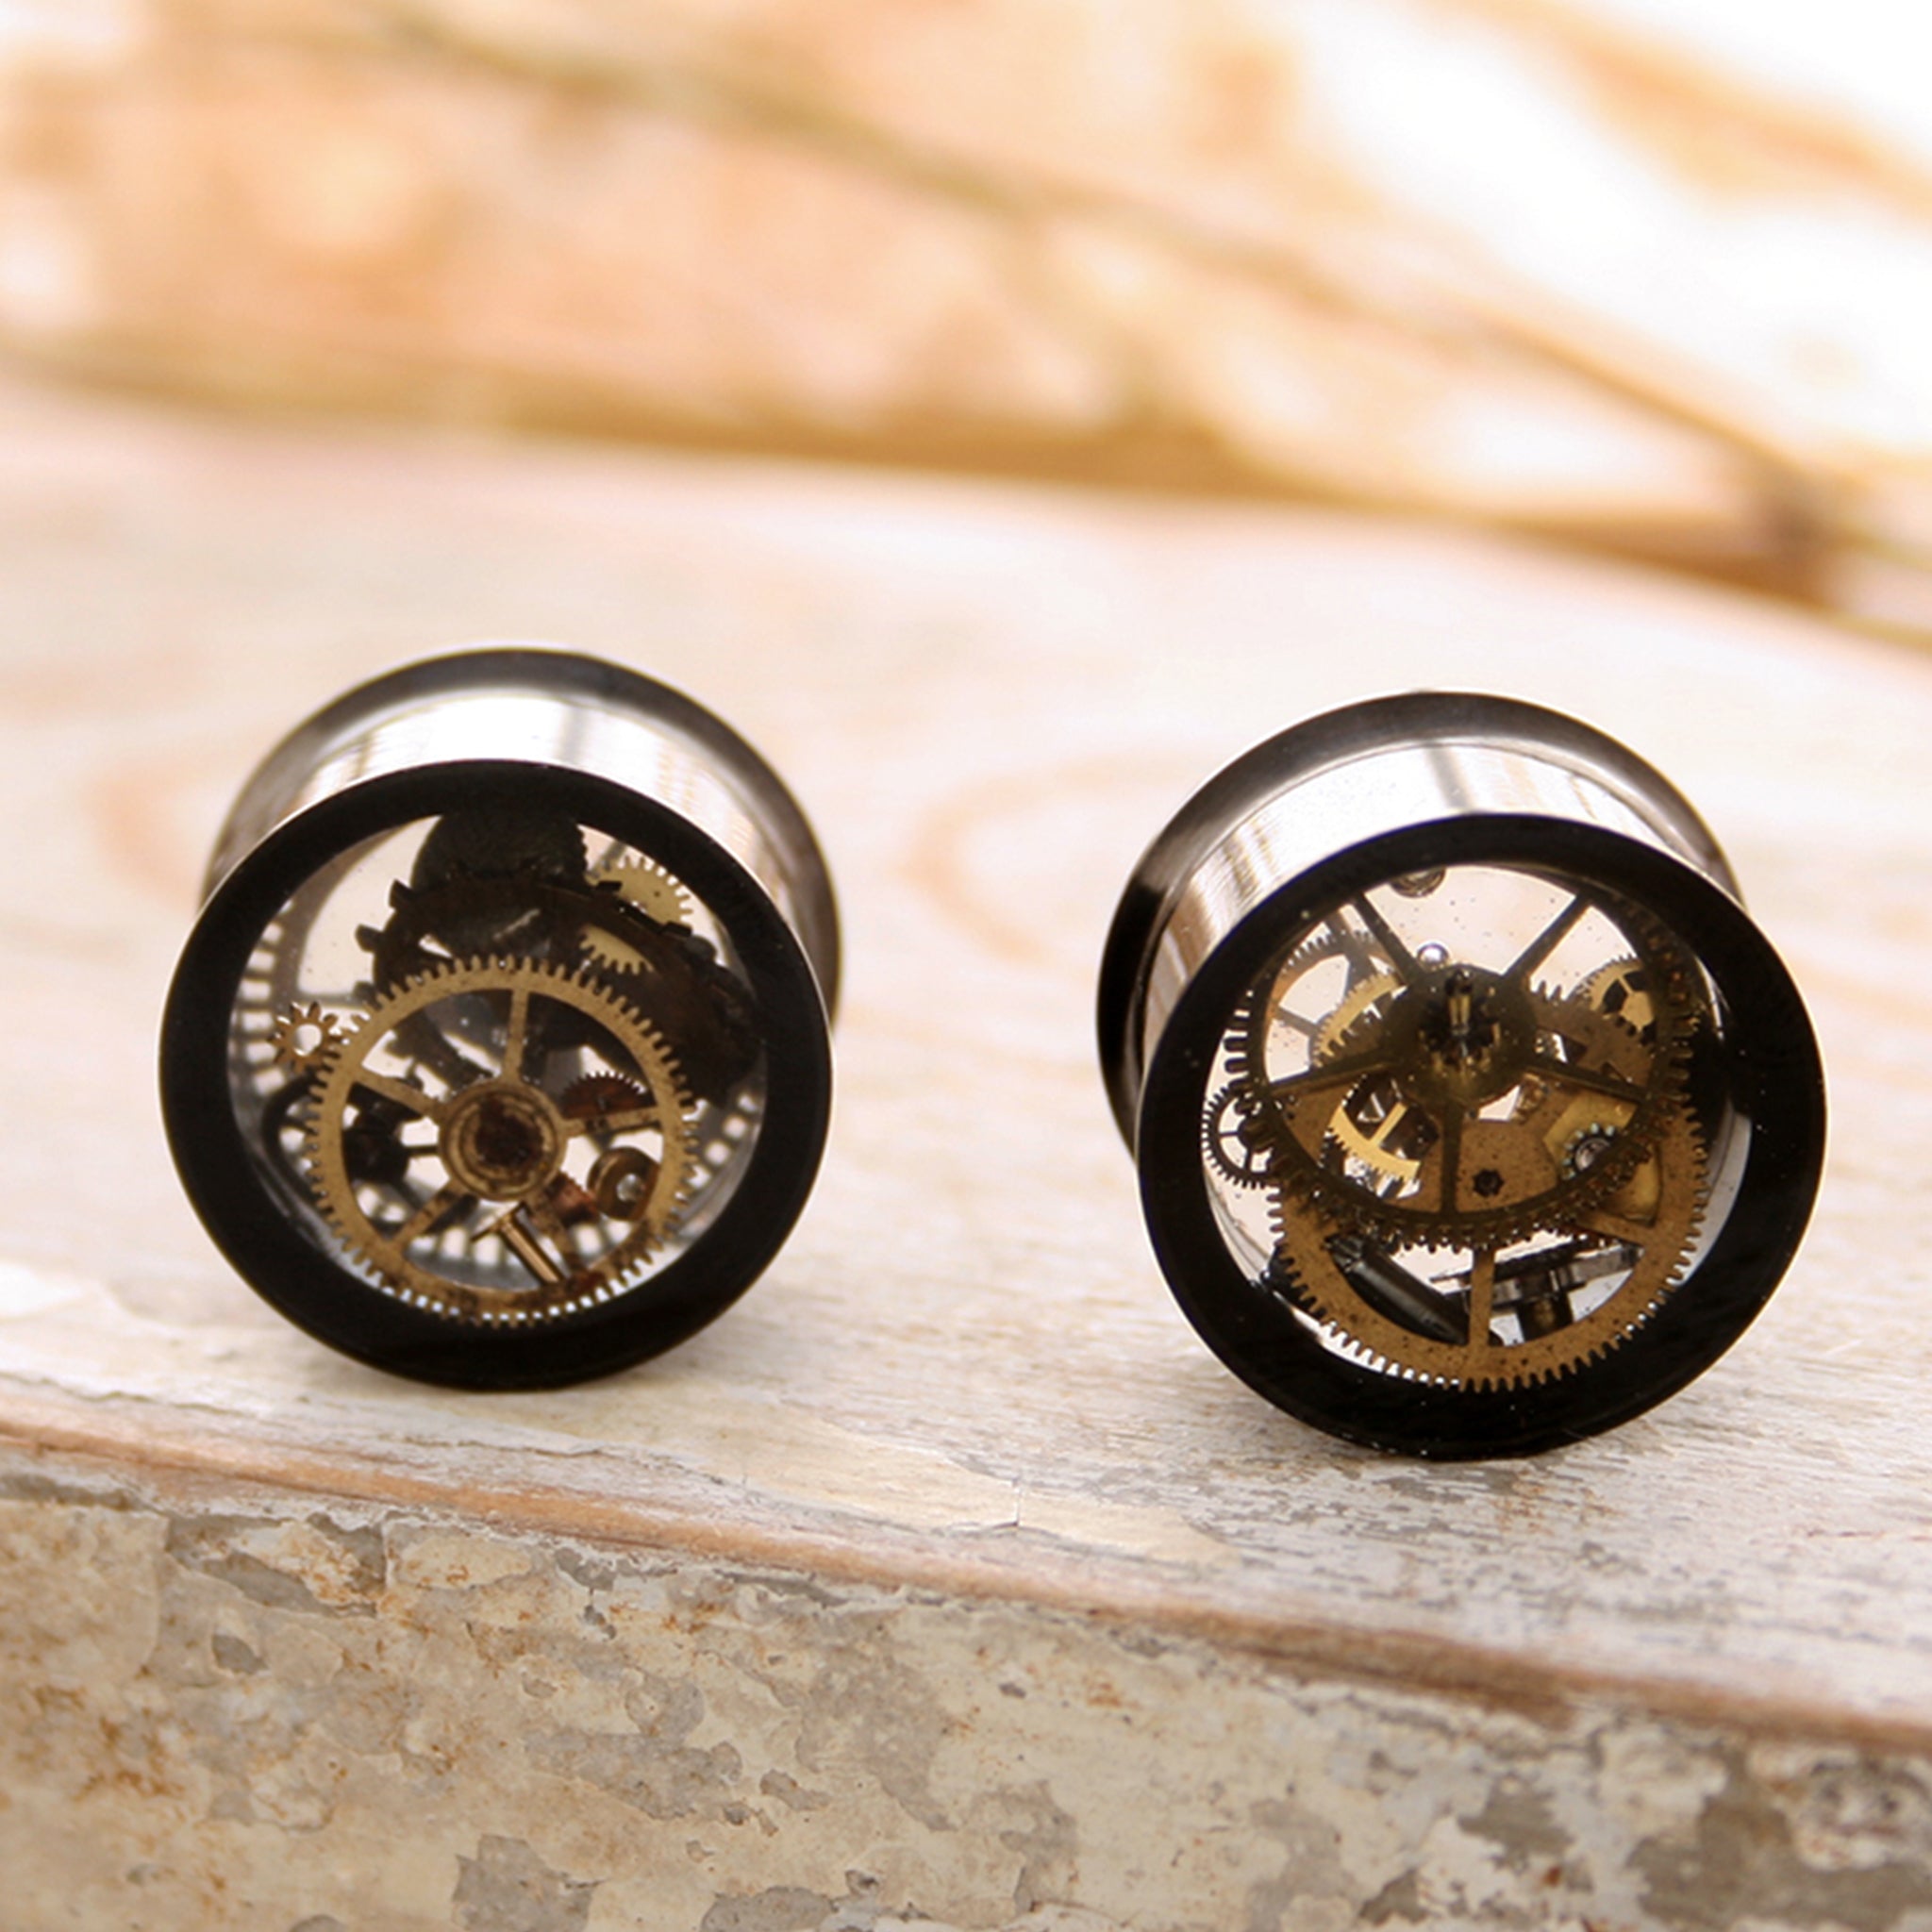 Cool 16mm double flare ear gauges in steampunk style